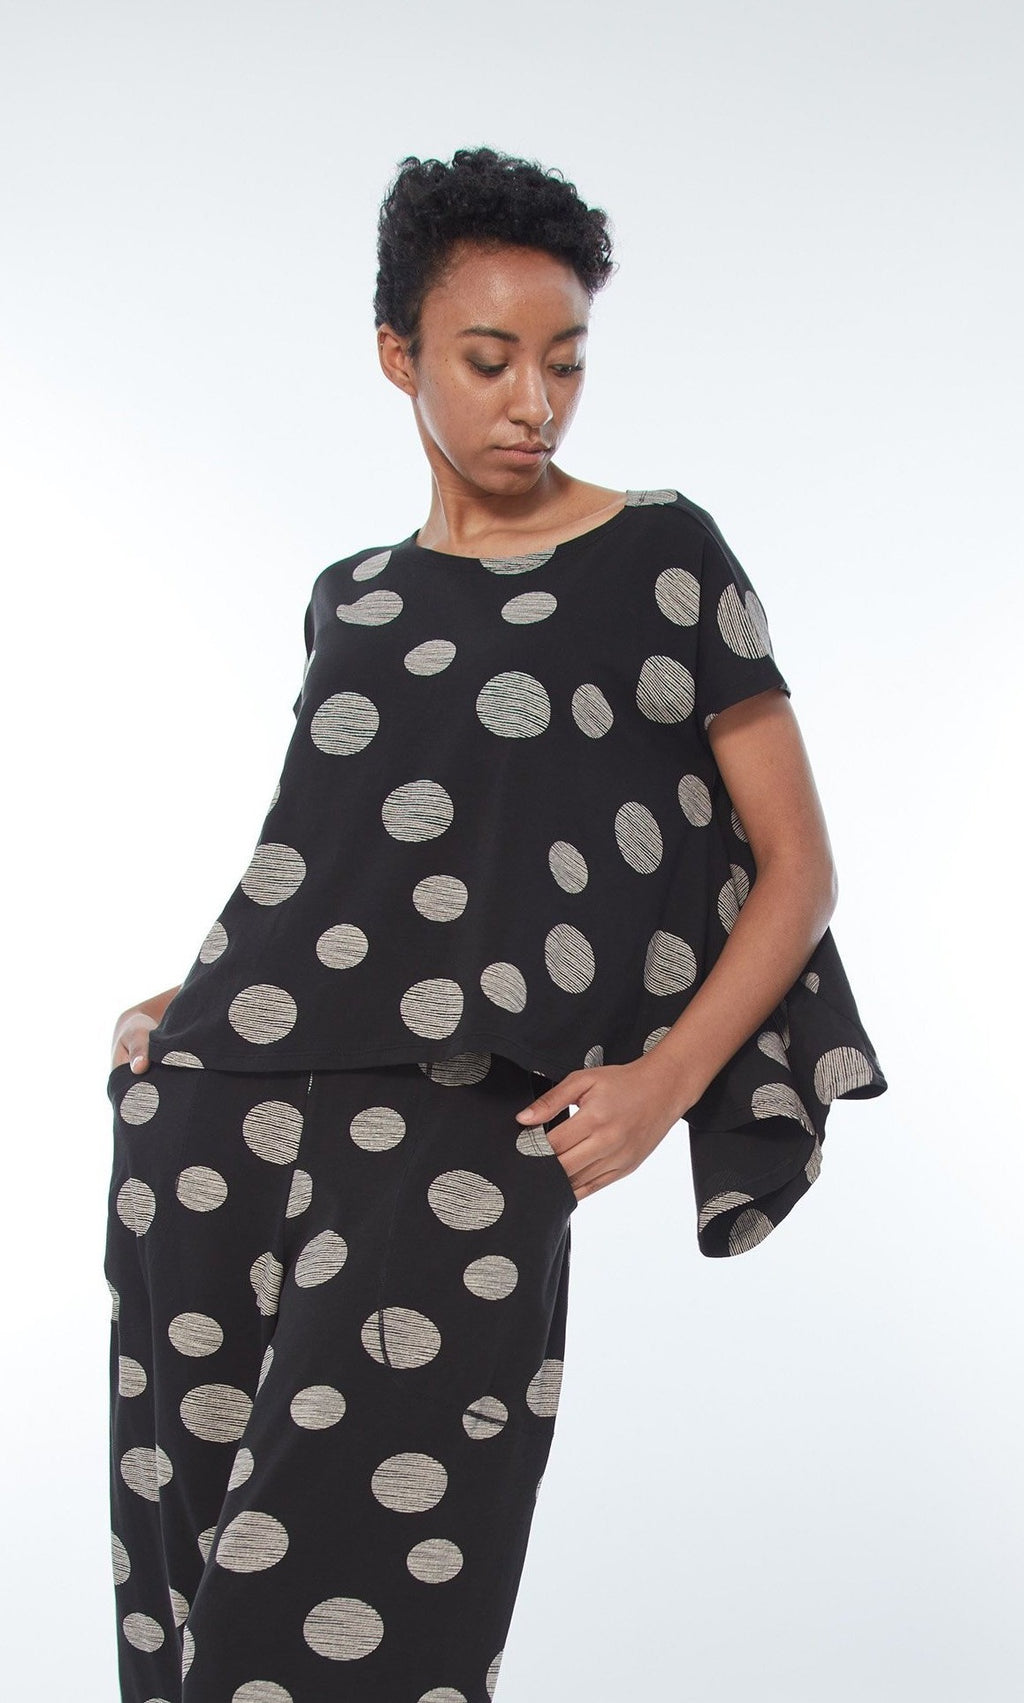 Front top half view of a woman wearing the M x Matthildur Ashley top. This top is black with taupe dots on it. The top has short sleeves and a flowy fit with an asymmetrical hem. On the bottom the model is wearing a matching black and taupe dotted pant.